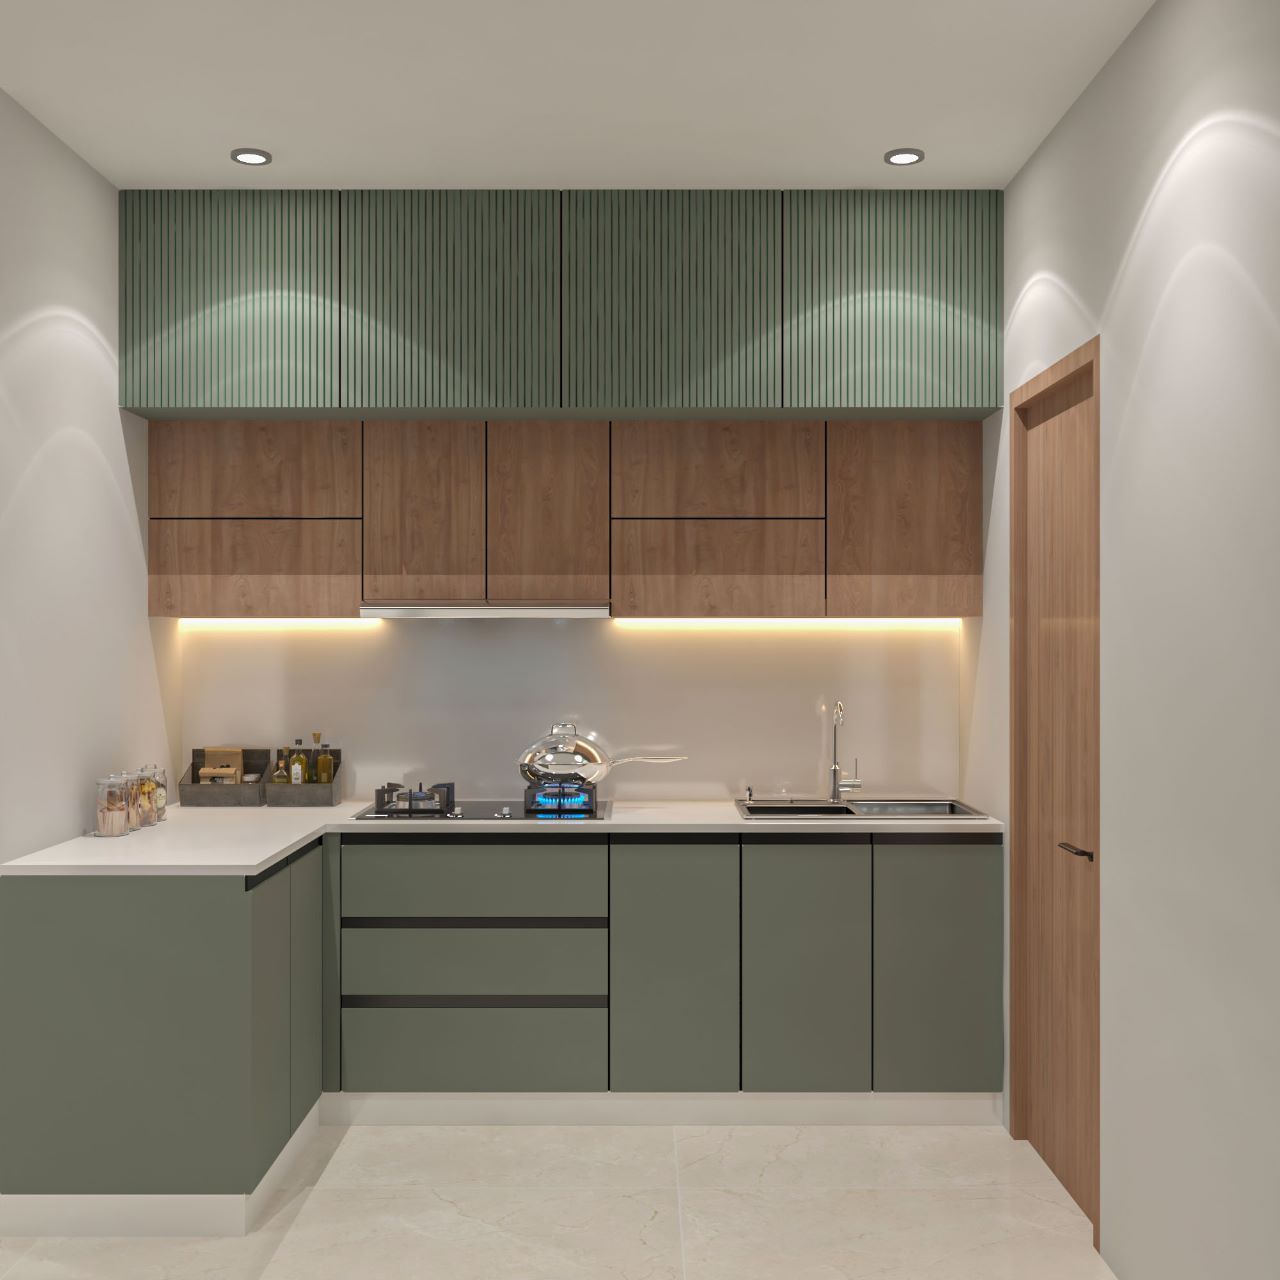 Modular kitchen – have one for yourself